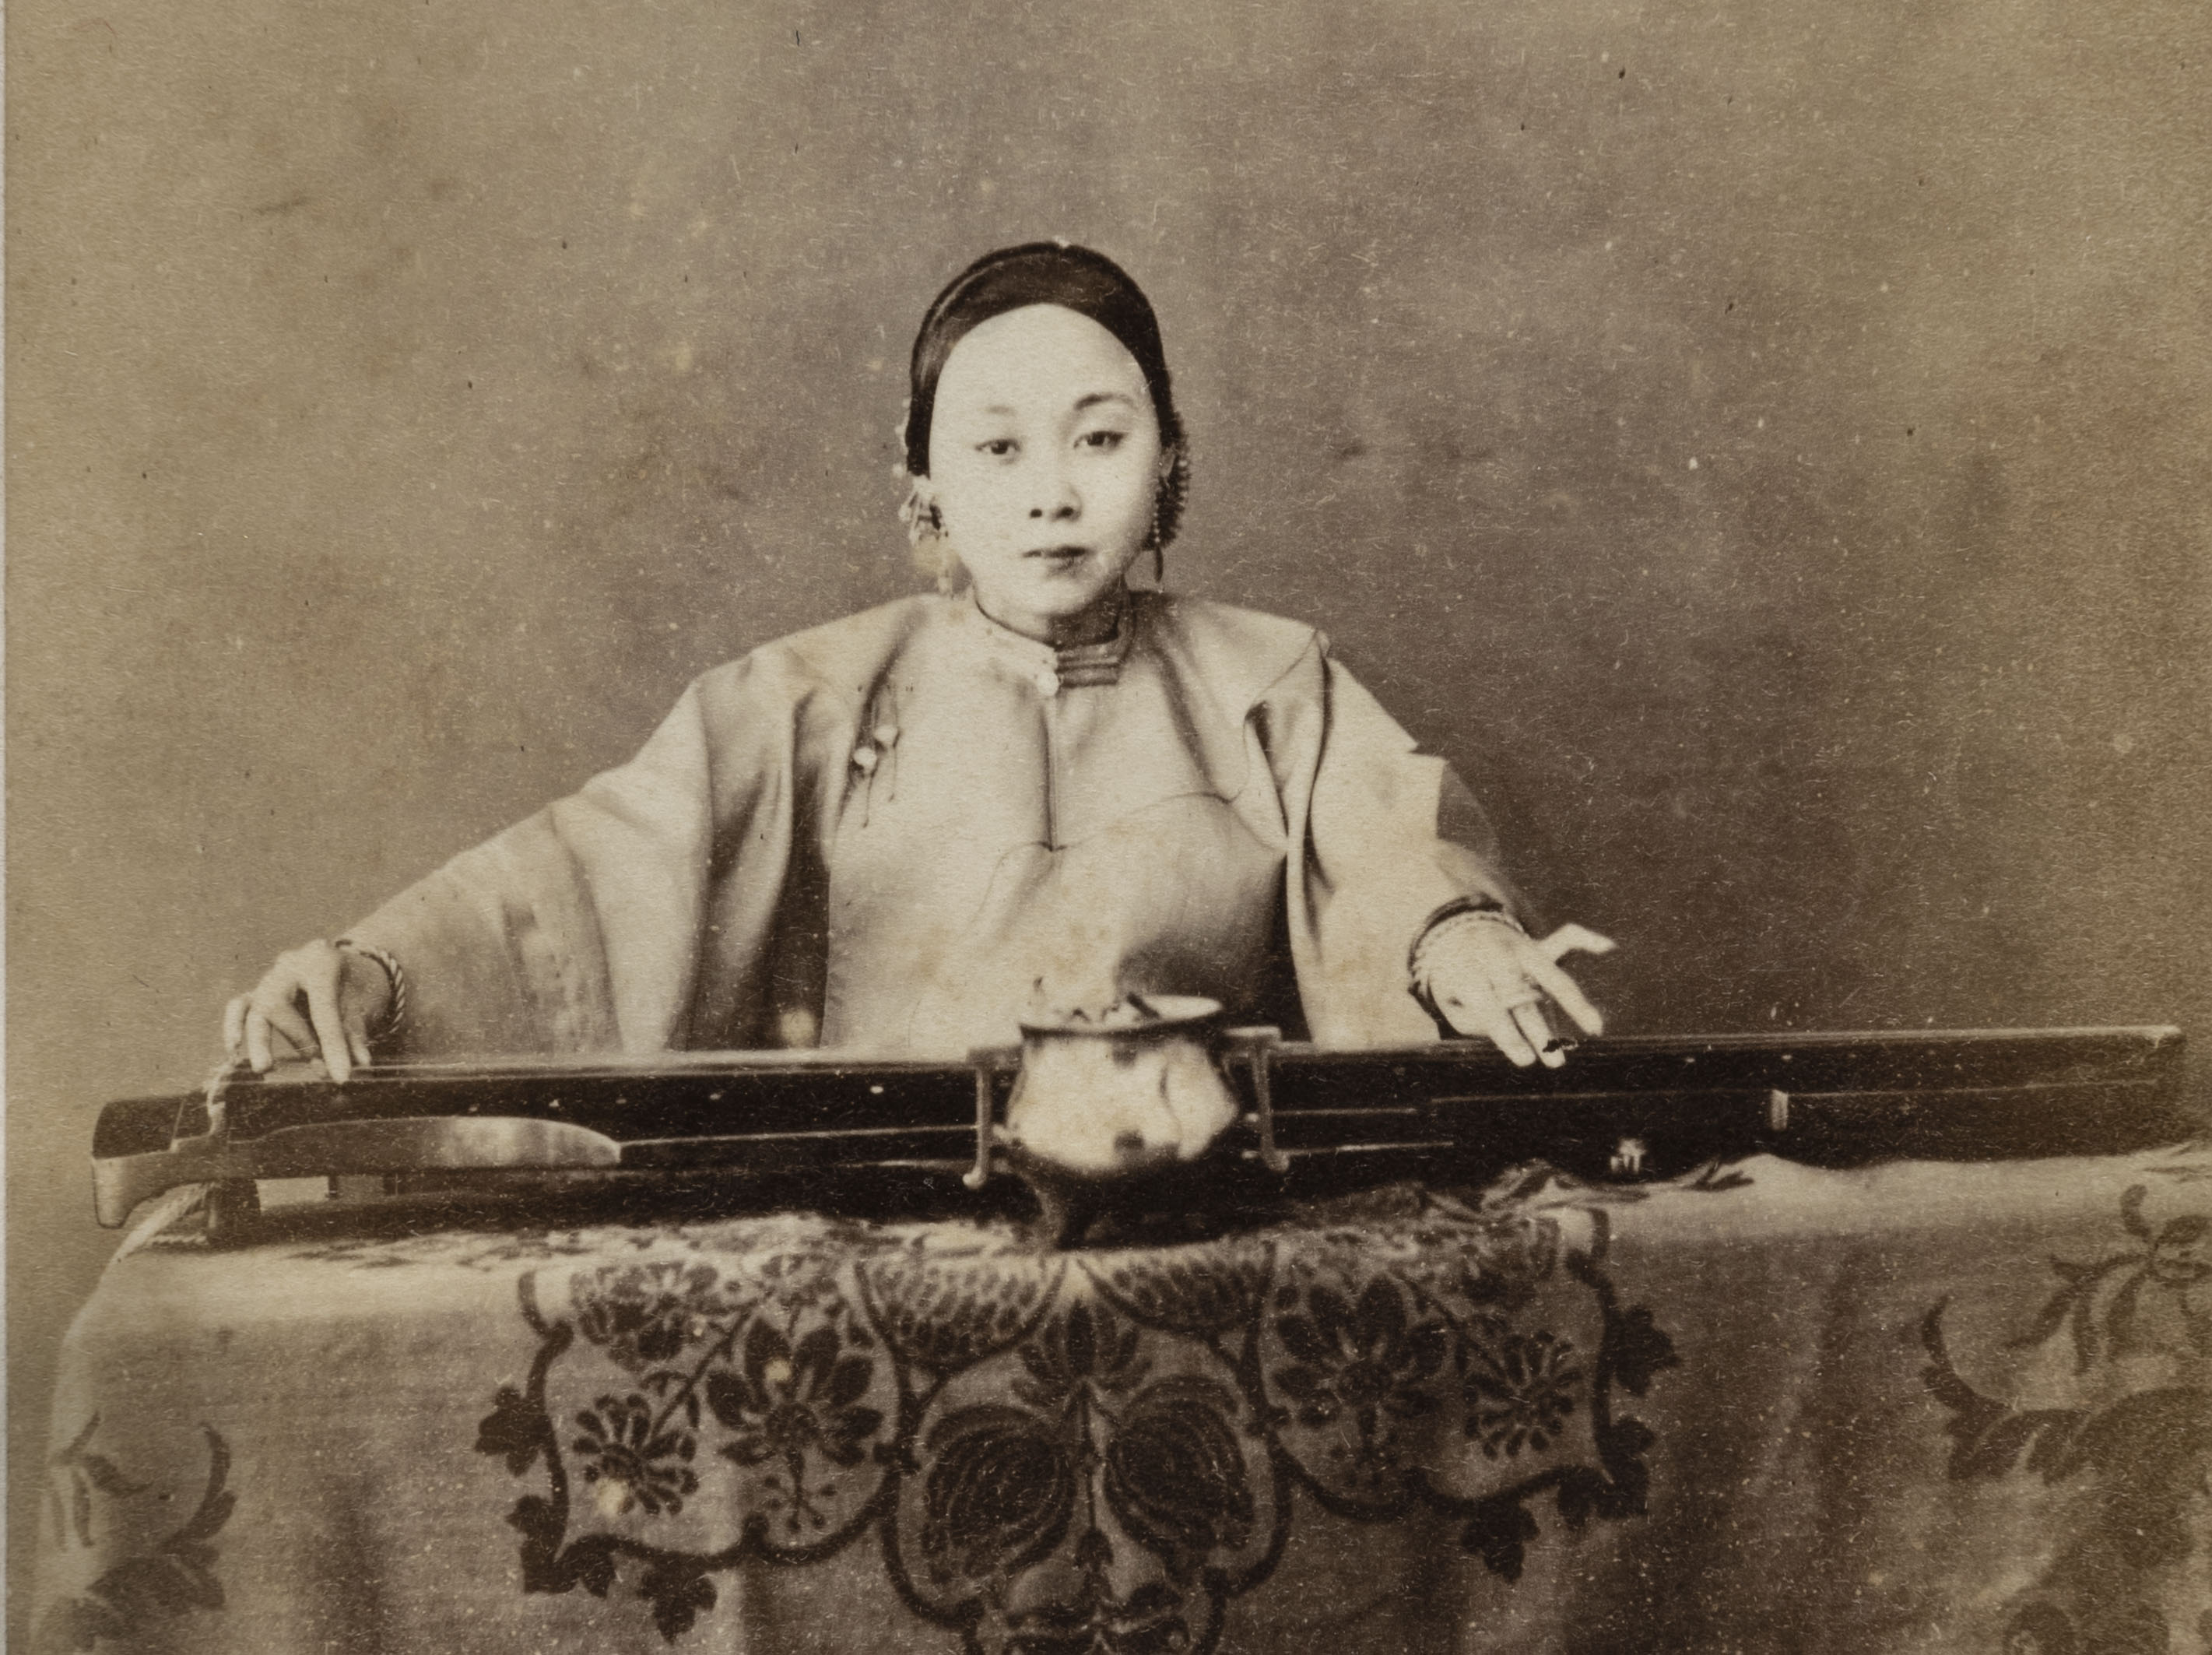 AN EARLY PHOTOGRAPH OF CHINA’S MOST REVERED ANCIENT MUSICAL INSTRUMENT